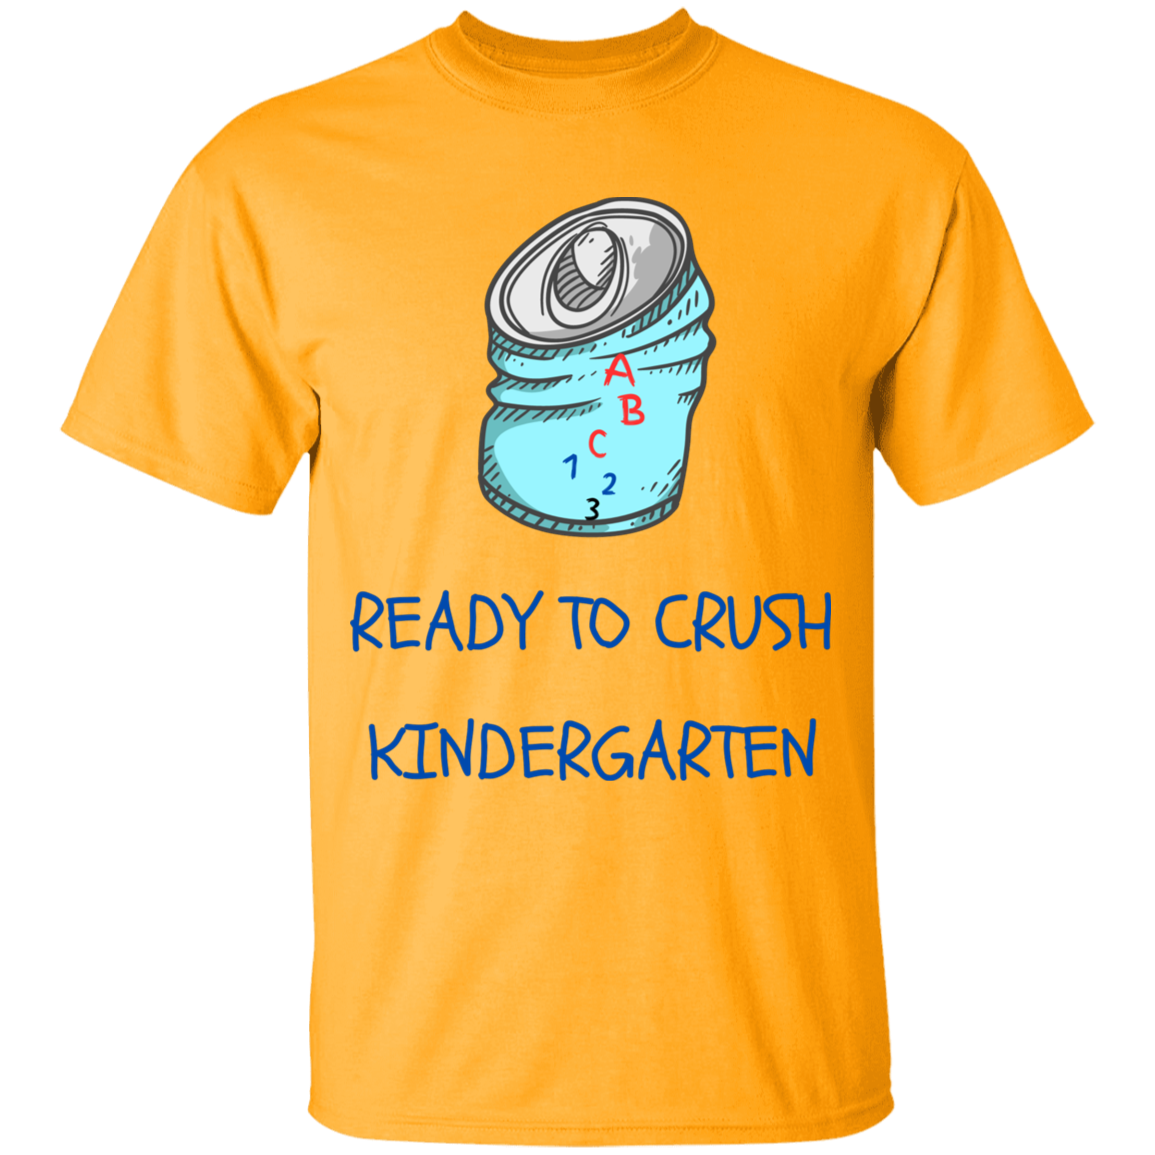 Get trendy with Youth Ready to crush kindergarten - T-Shirts available at Good Gift Company. Grab yours for $20.42 today!